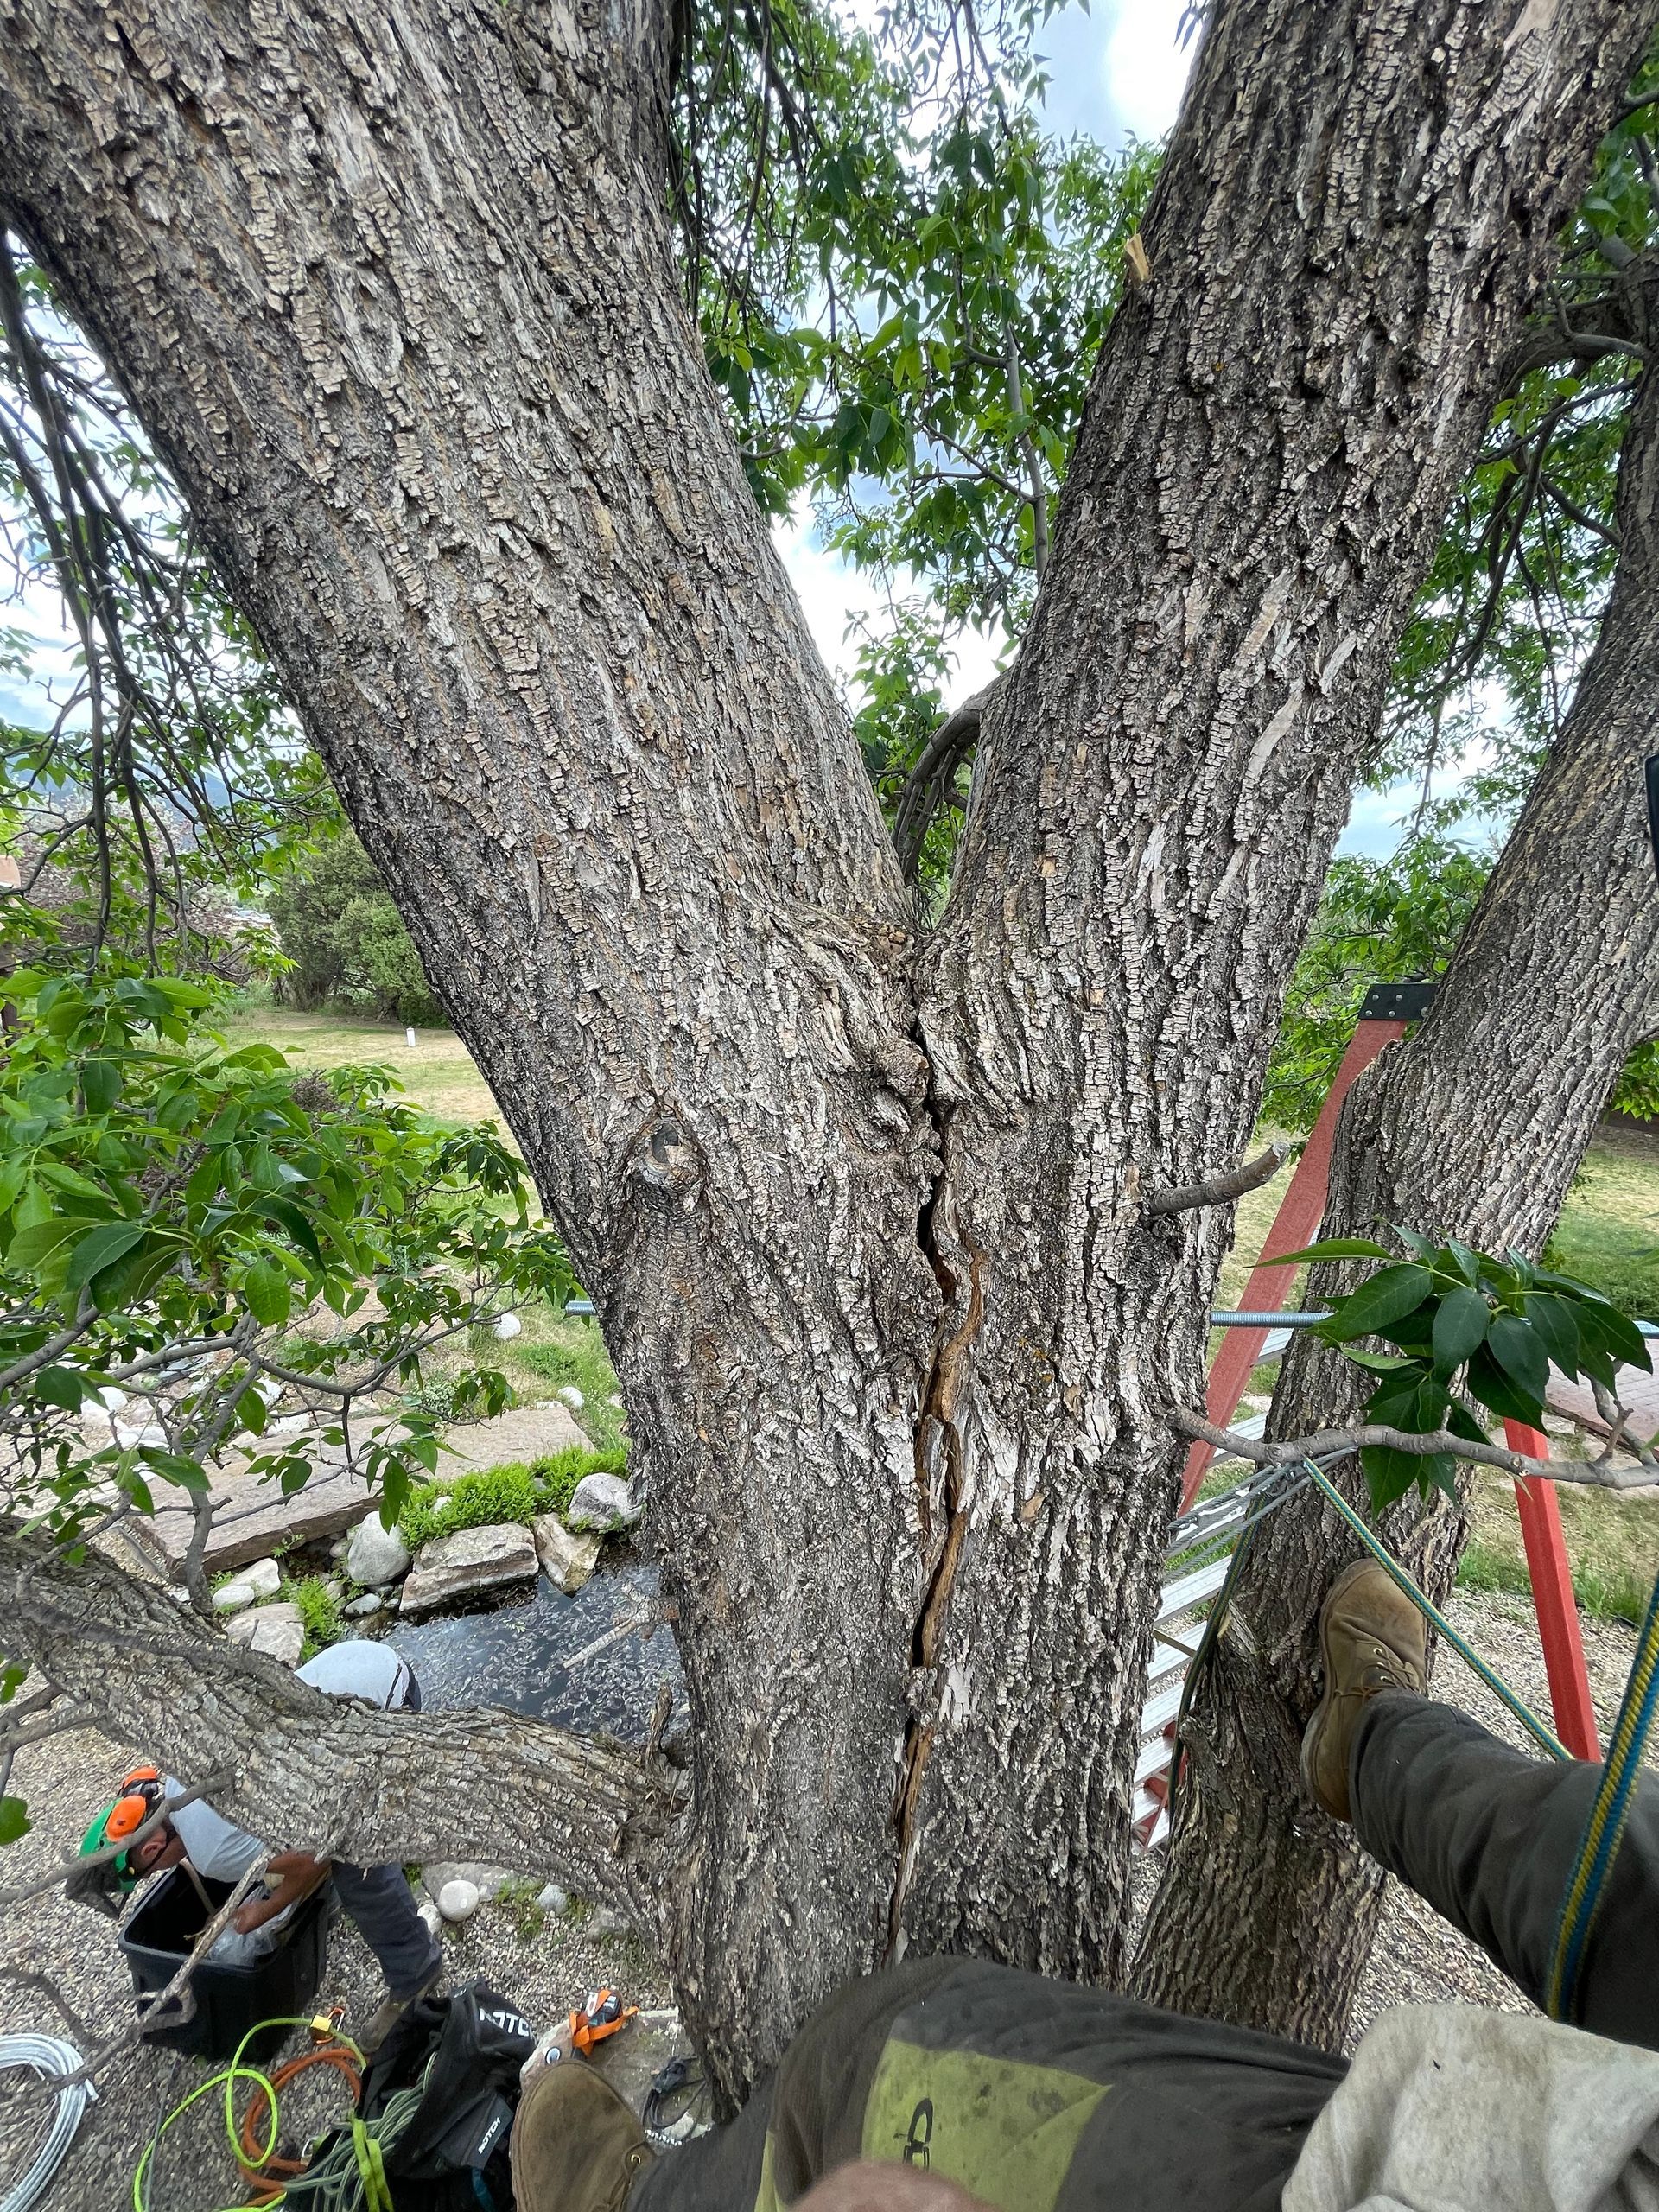 A tree with two large branches growing apart from each other with a crack down the middle before Taos Tree added cabling.